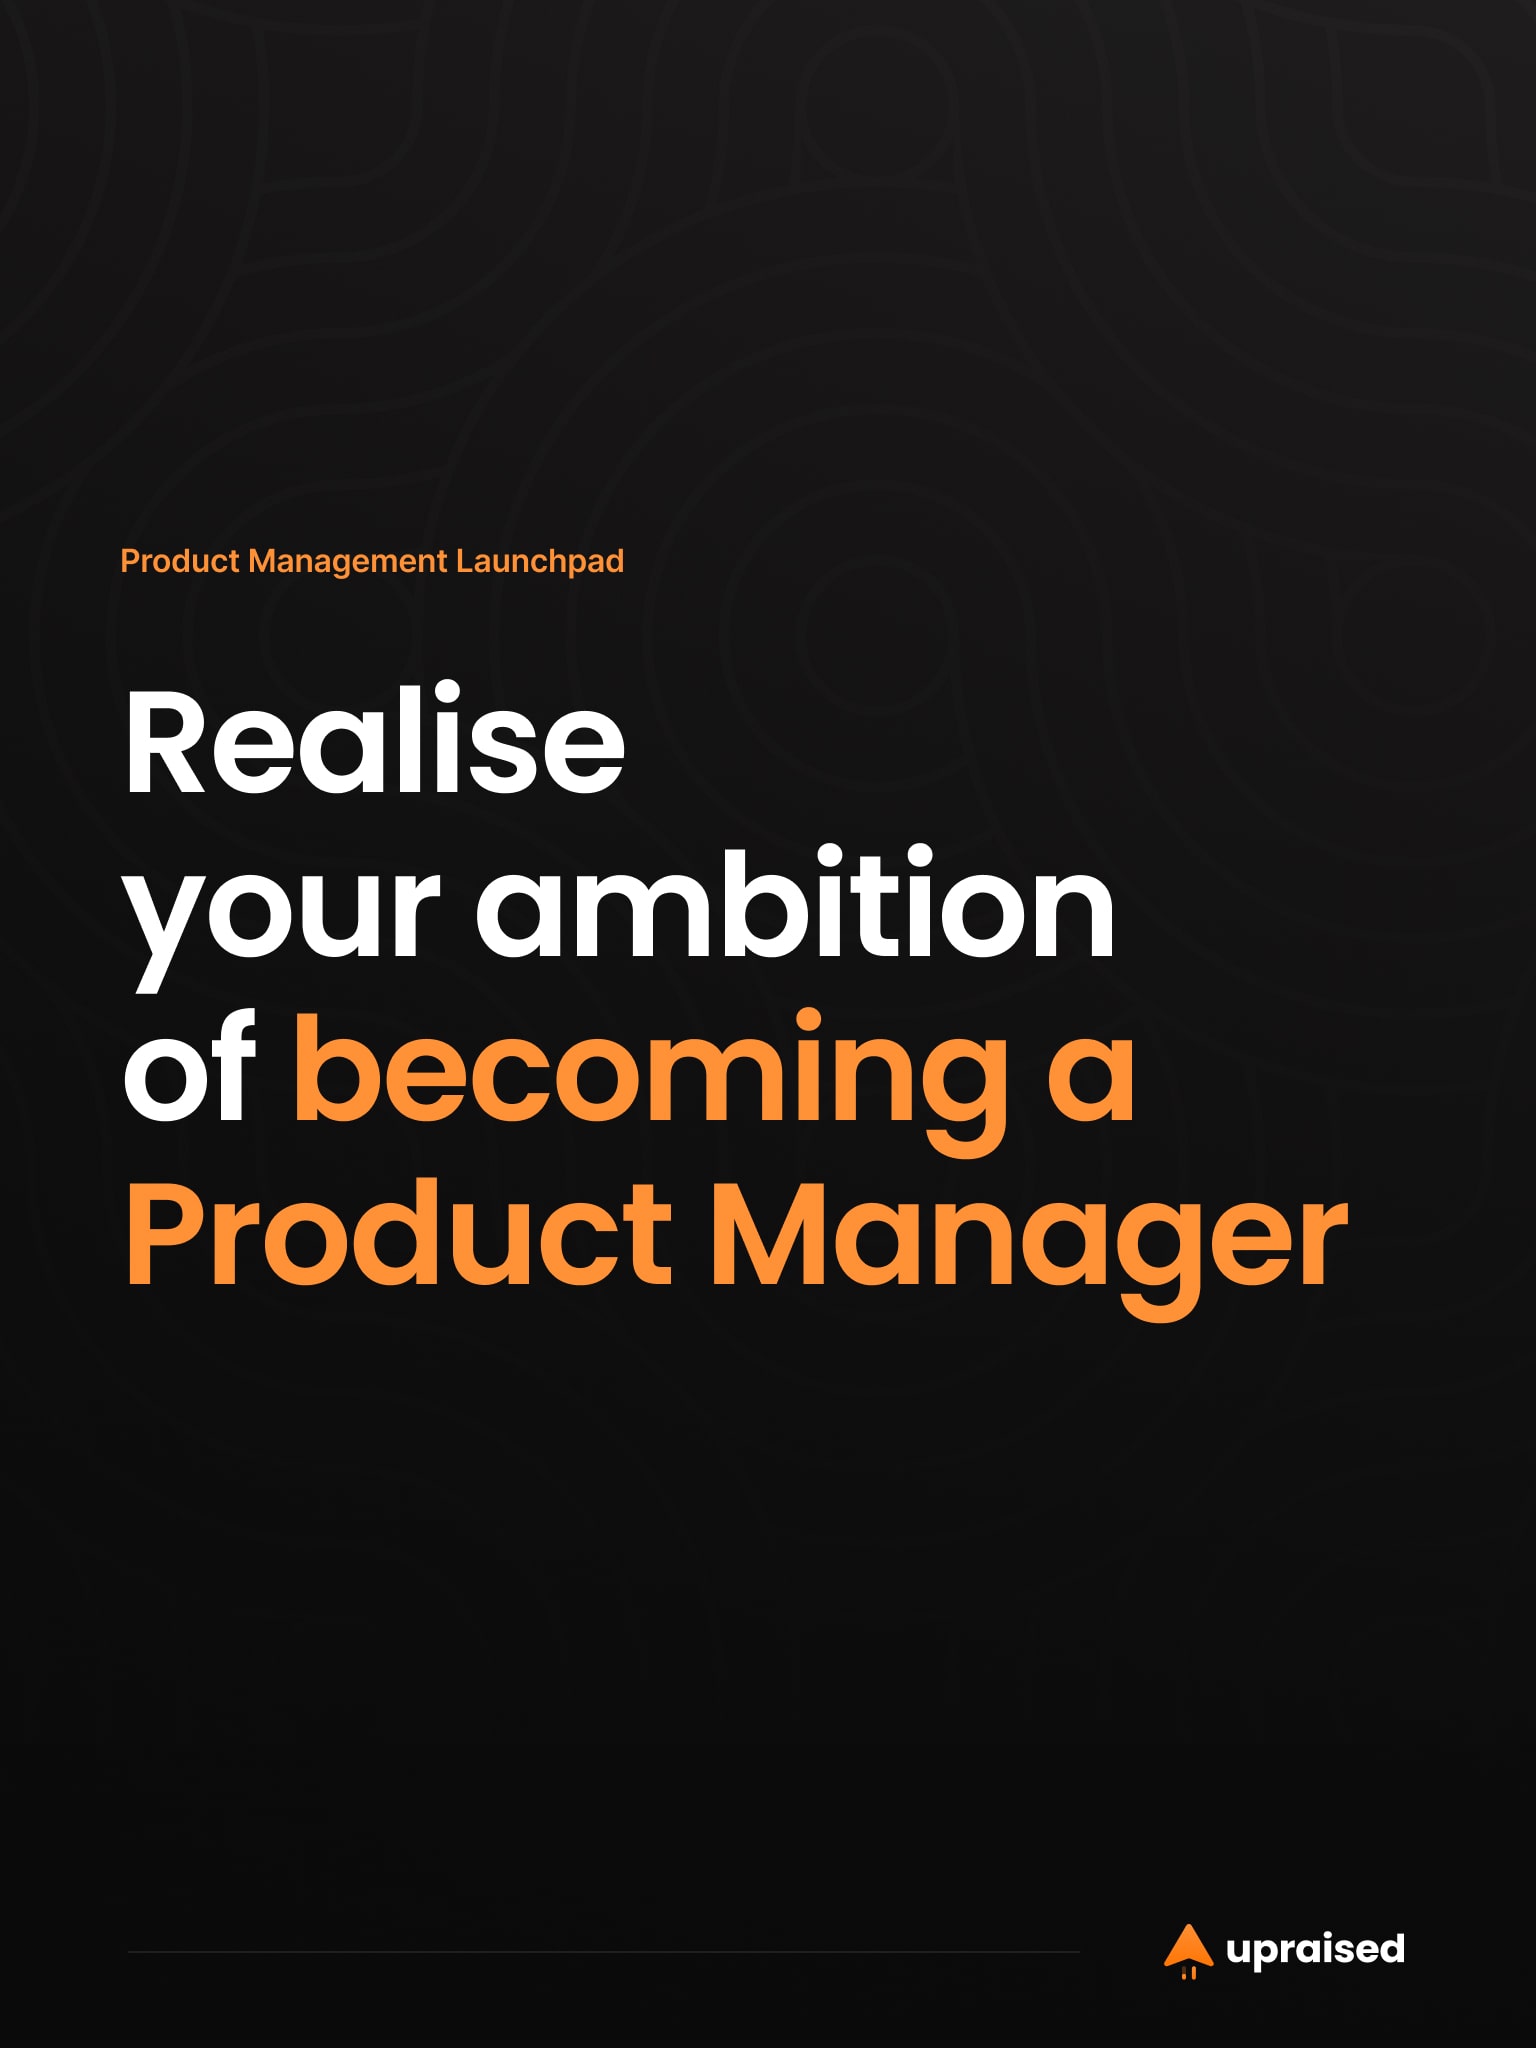 Product Management Launchpad Curriculum Cover Page